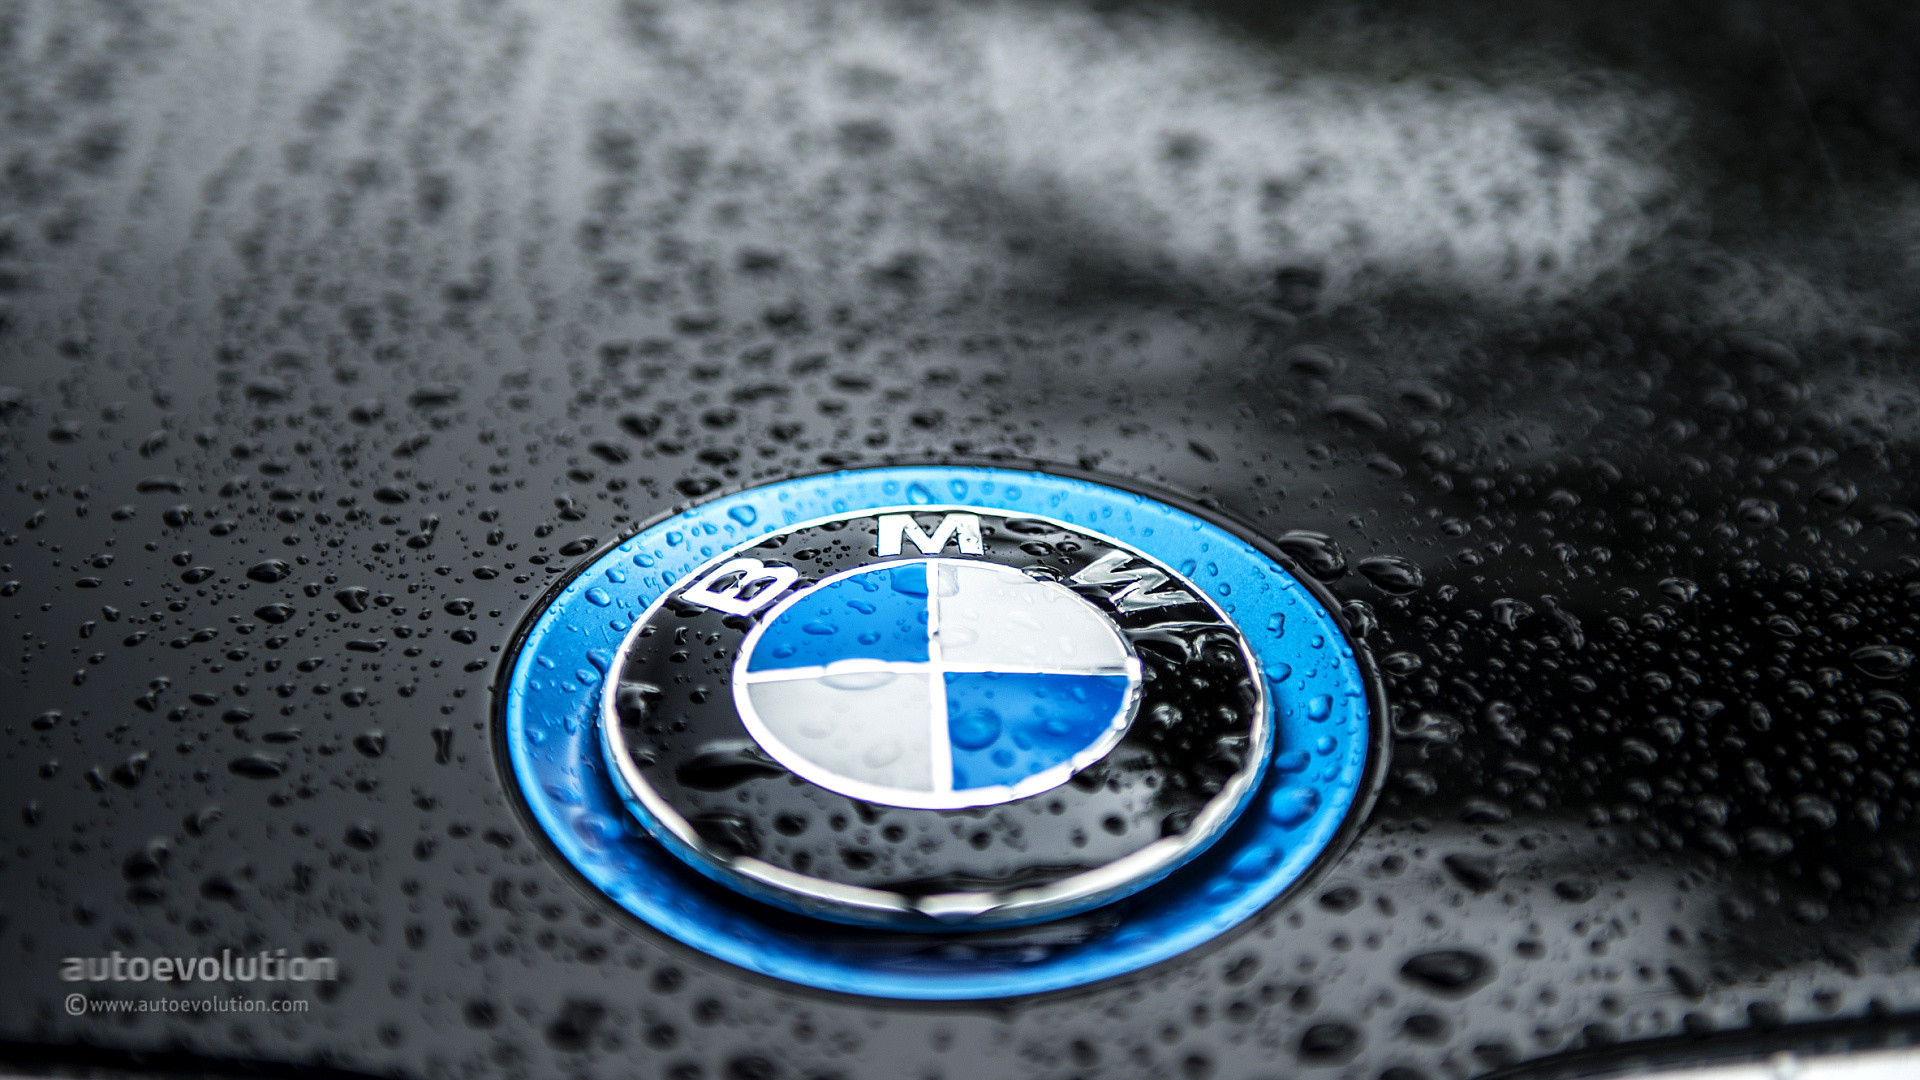 1920x1080 Not too long ago, people couldn't have immagined this famous roundel  surrounded by the blue of the green motoring sea and yet here it is. Mind  you, BMW has ...